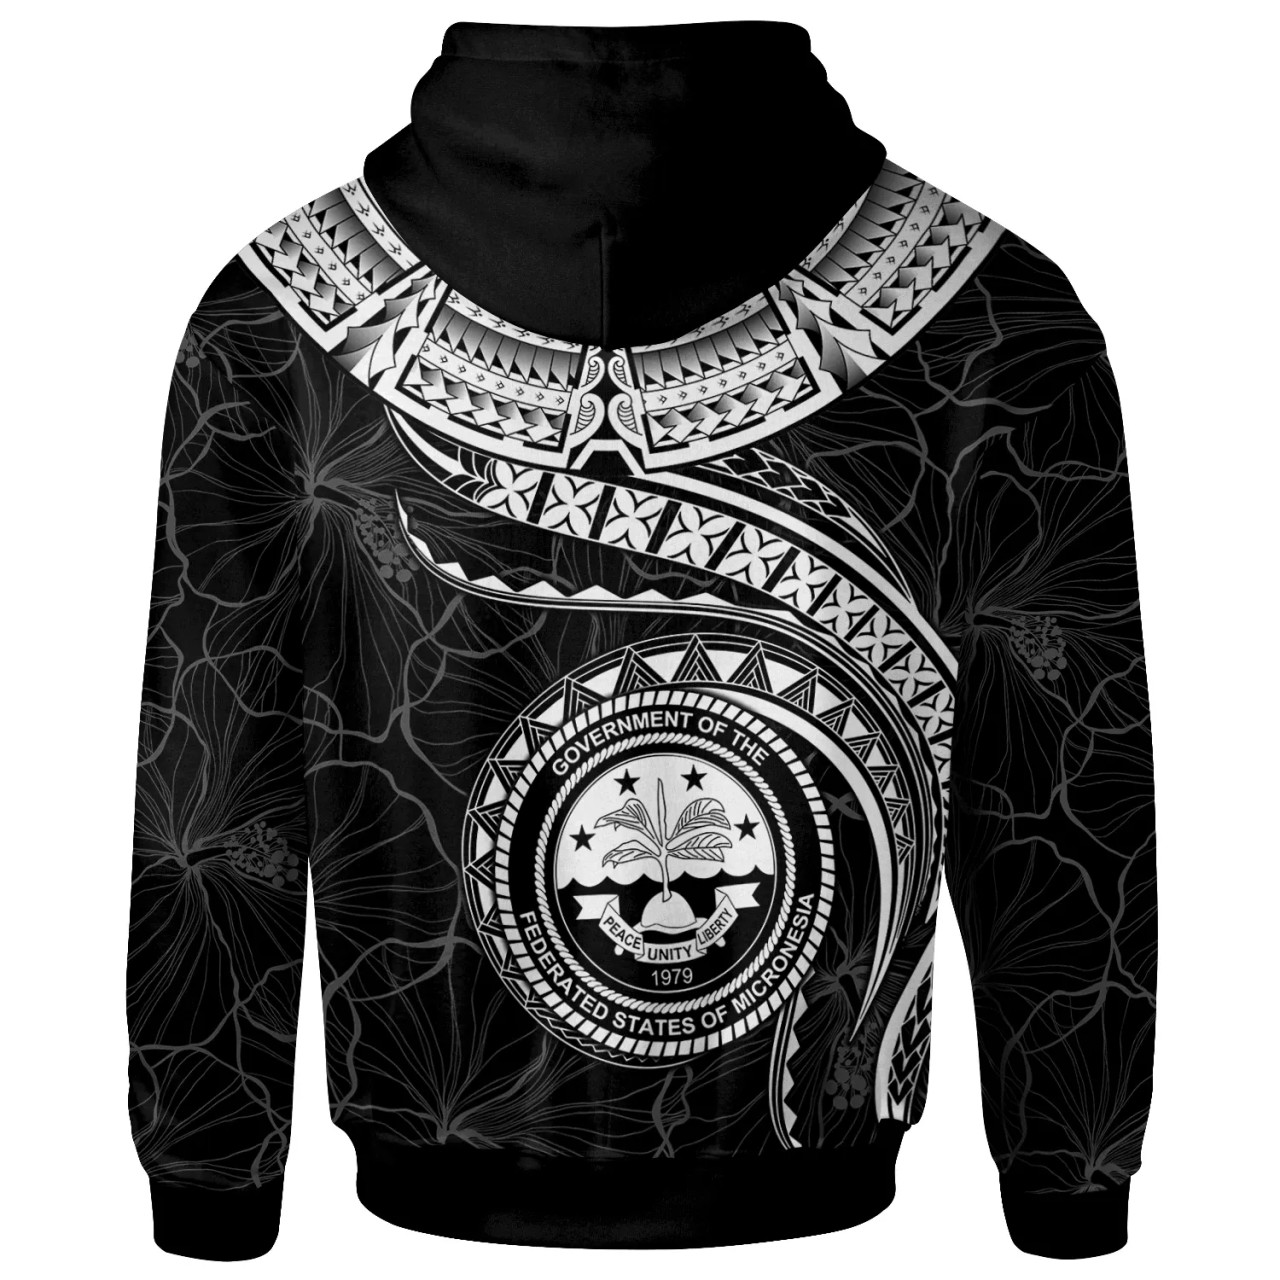 Federated States of Micronesia Polynesian Hoodie - FSM Waves (White)